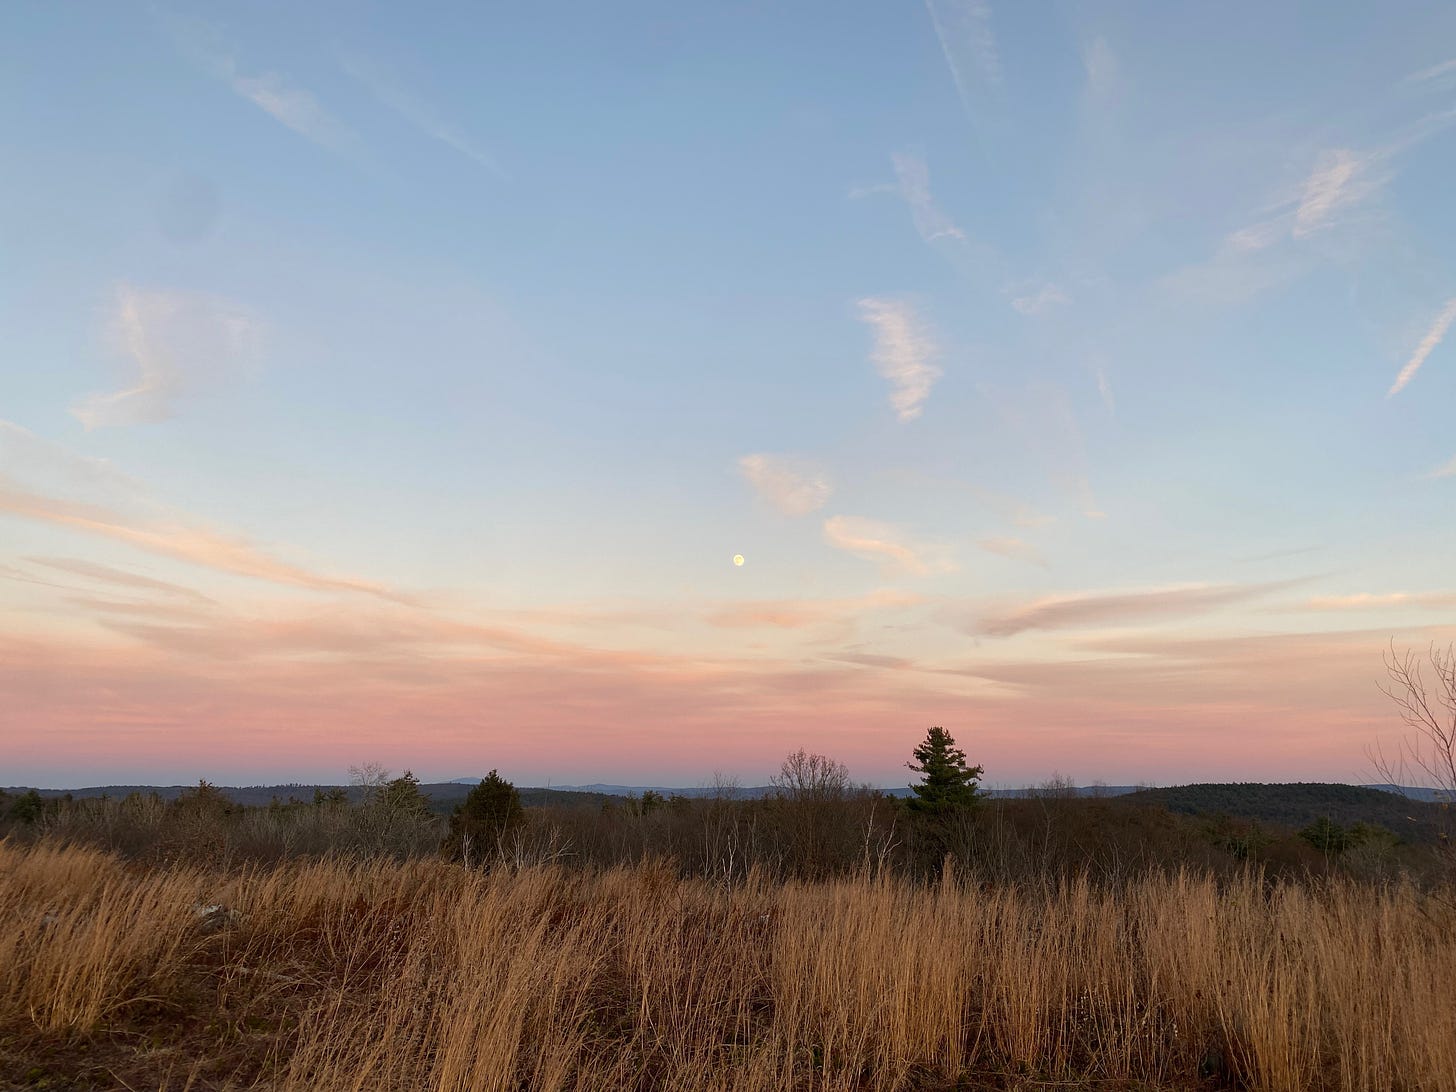 Vista of a ridgetop field. The horizon is pink and orange, the sky above pale blue. The moon is small and white.